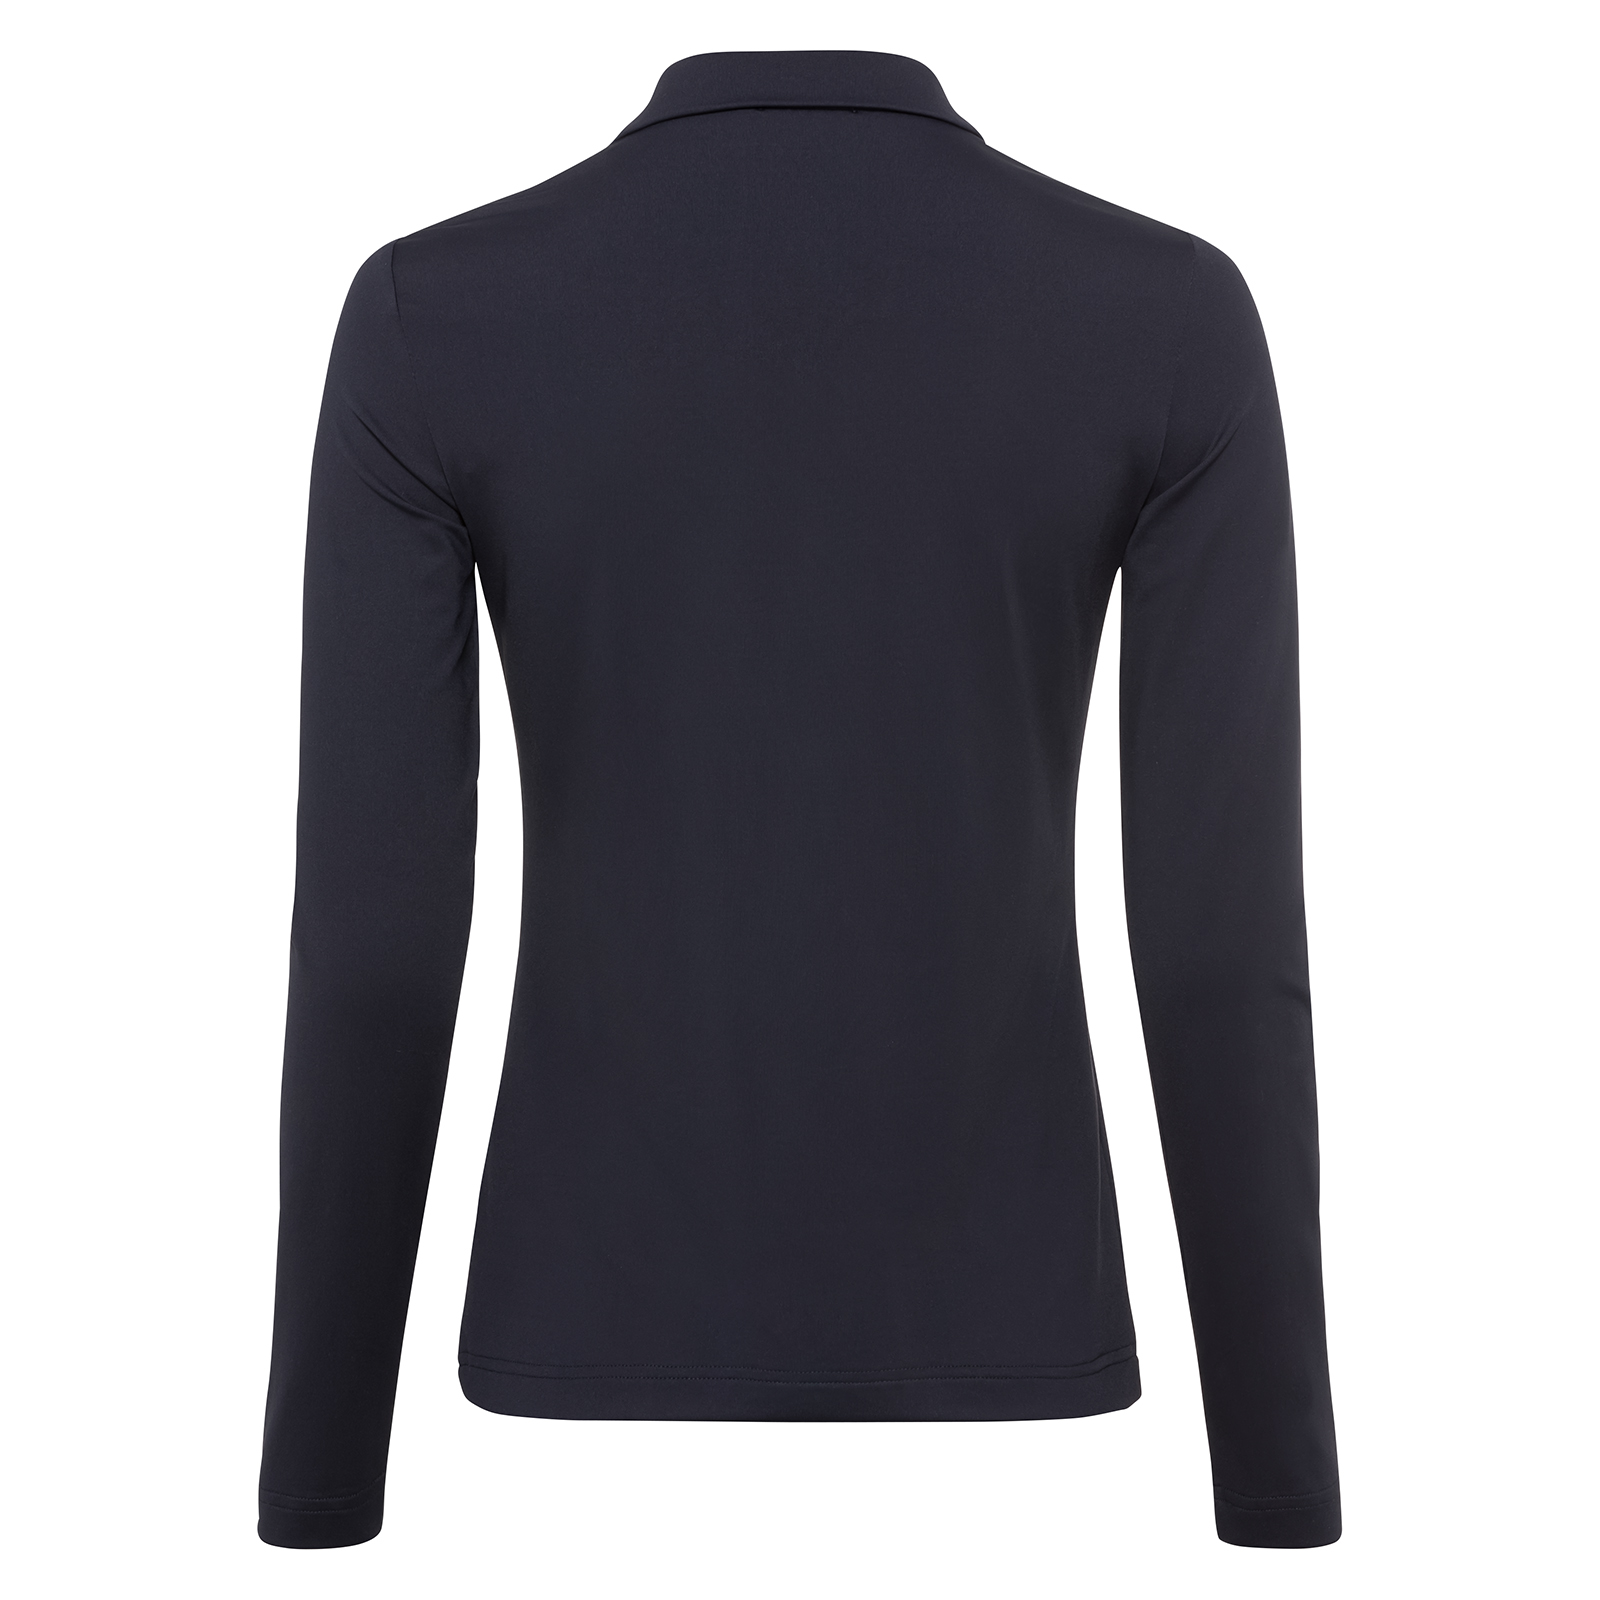 Ladies' long-sleeved polo shirt with colour blocking